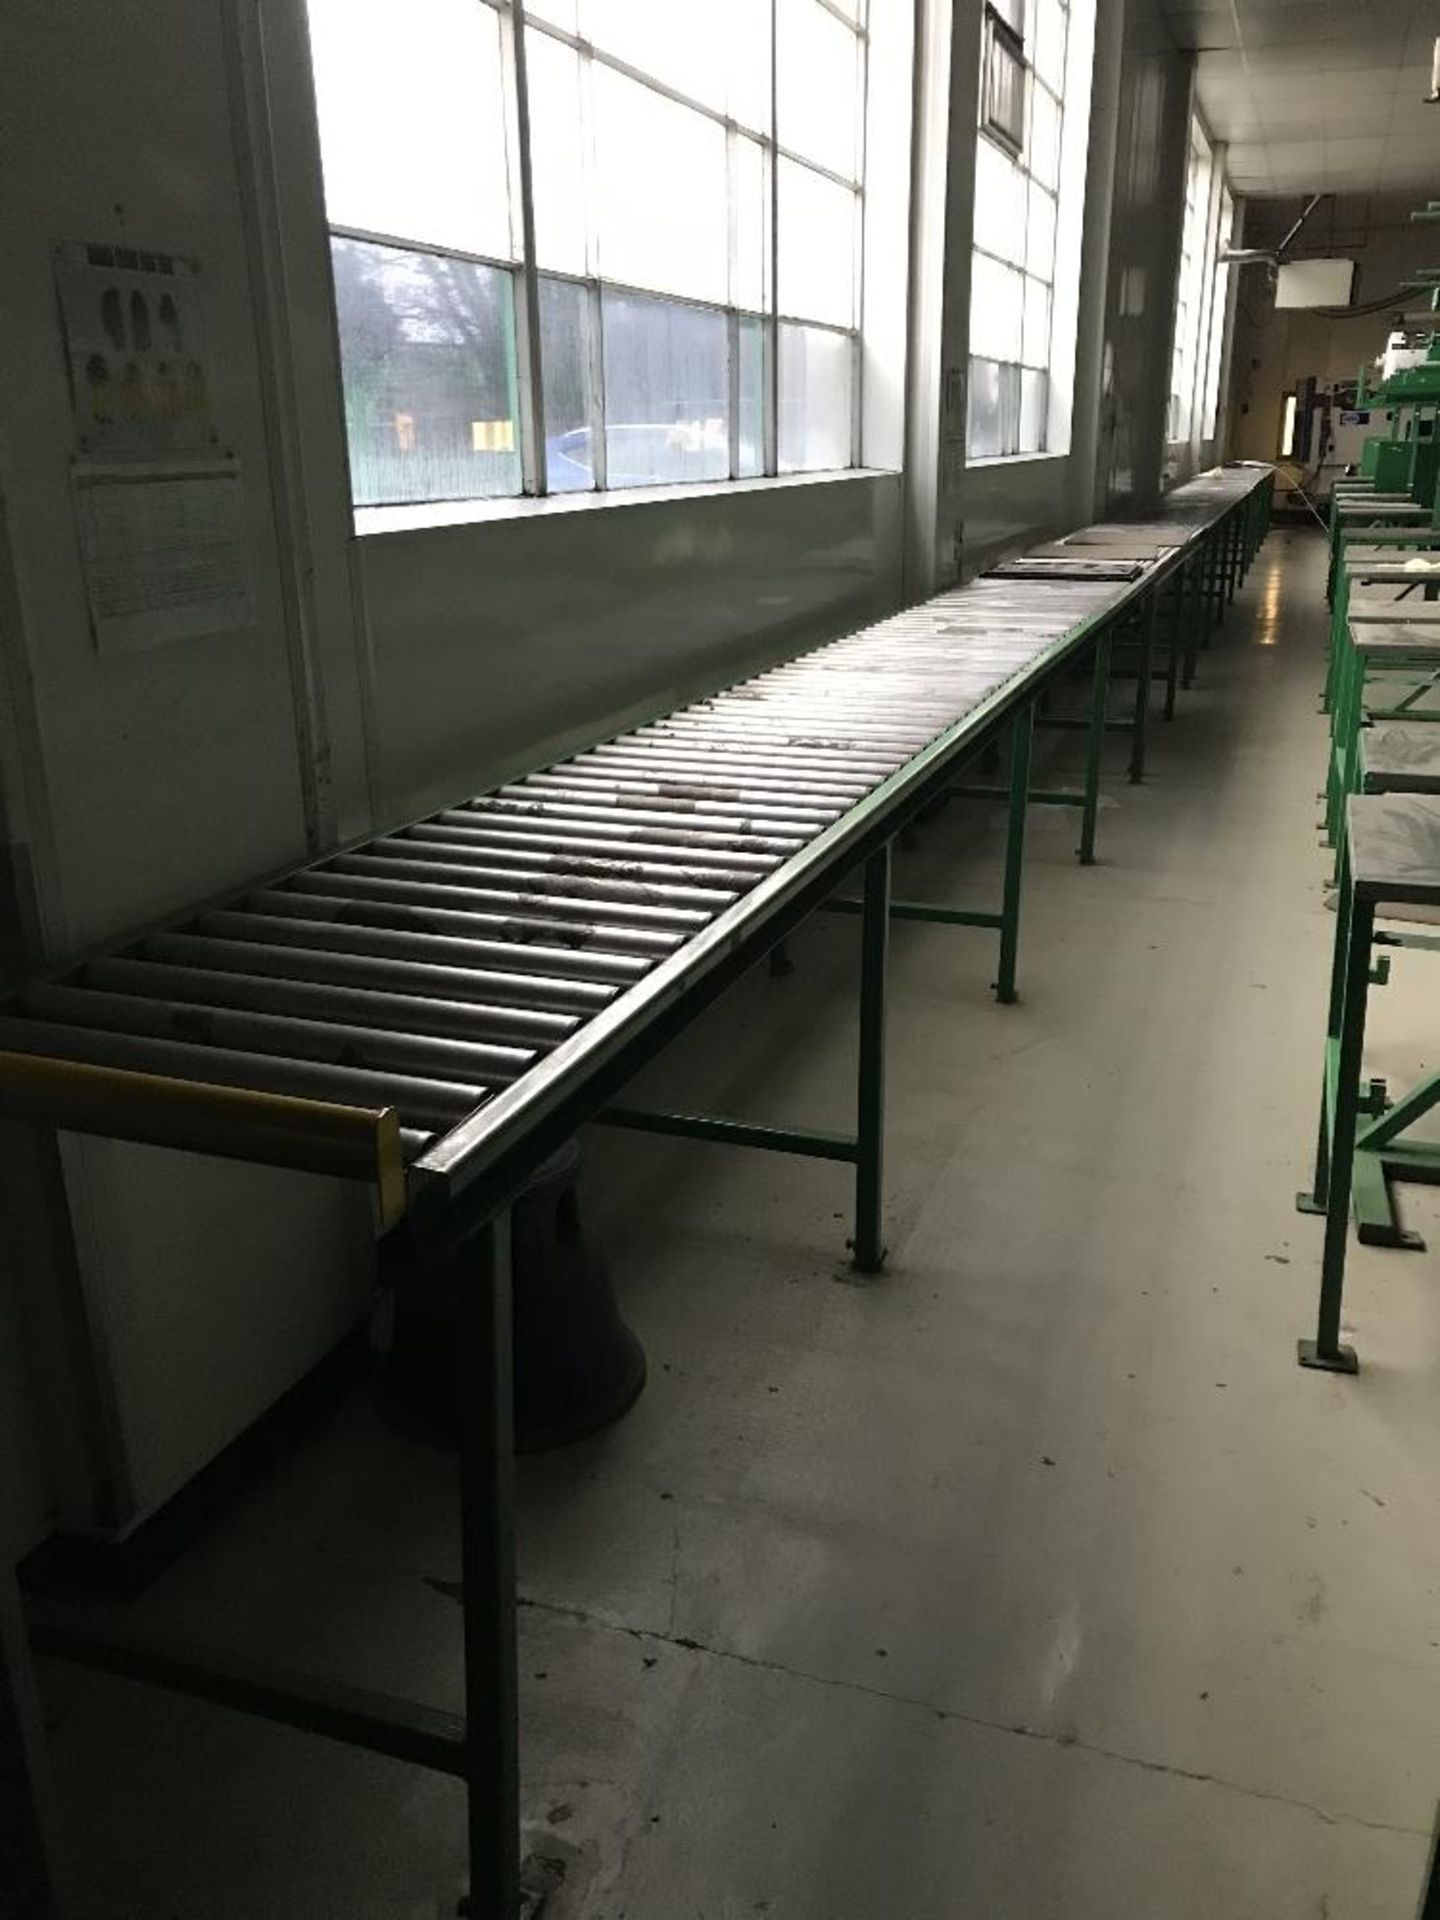 Manual Packing Line - Image 17 of 17